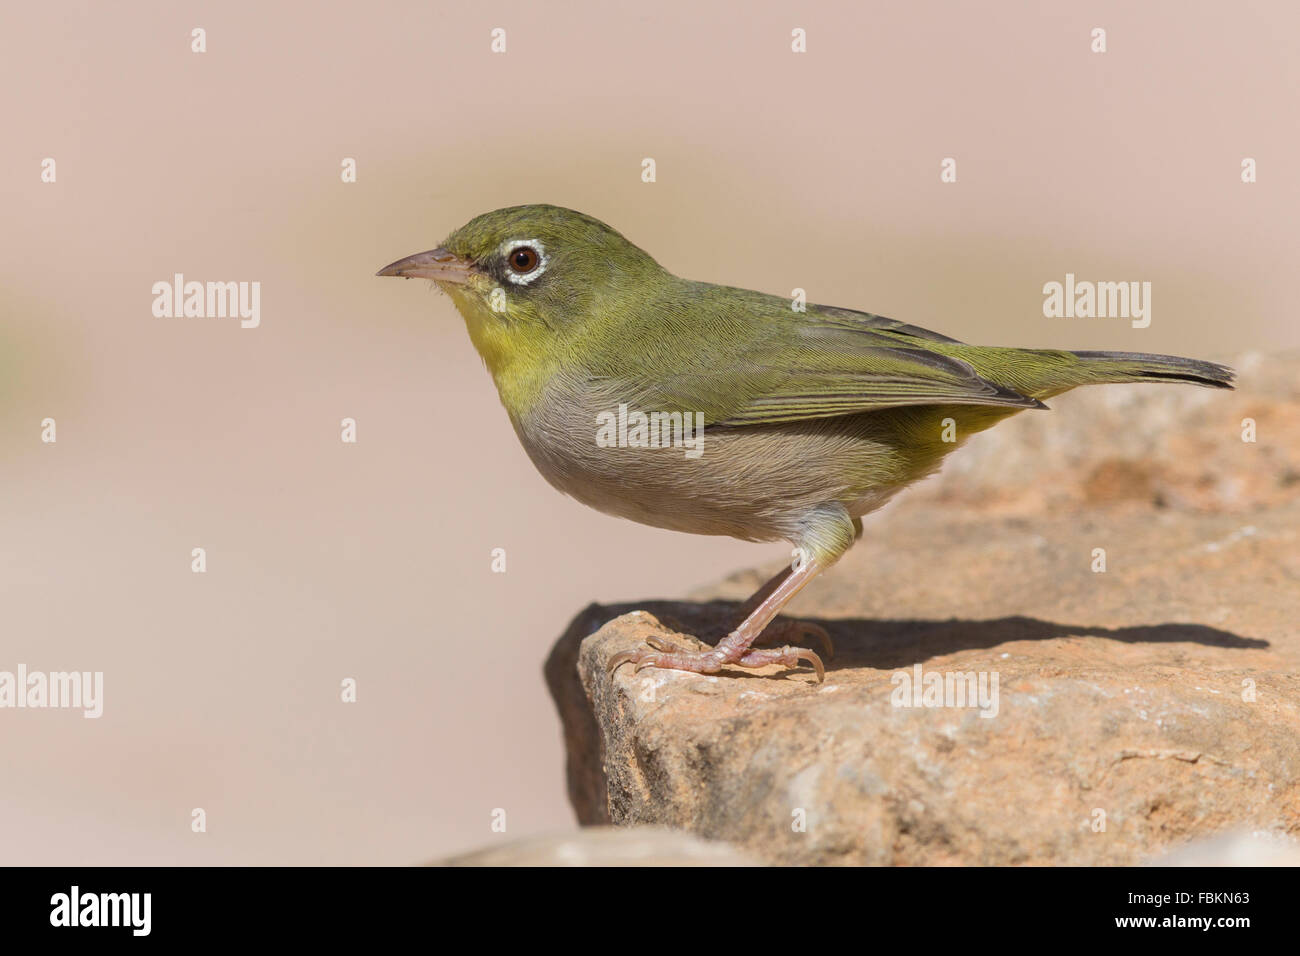 Abyssinian white-eye (Zosterops abyssinicus), standing on a rock, Wadi Darbat, Dhofar, Oman Stock Photo